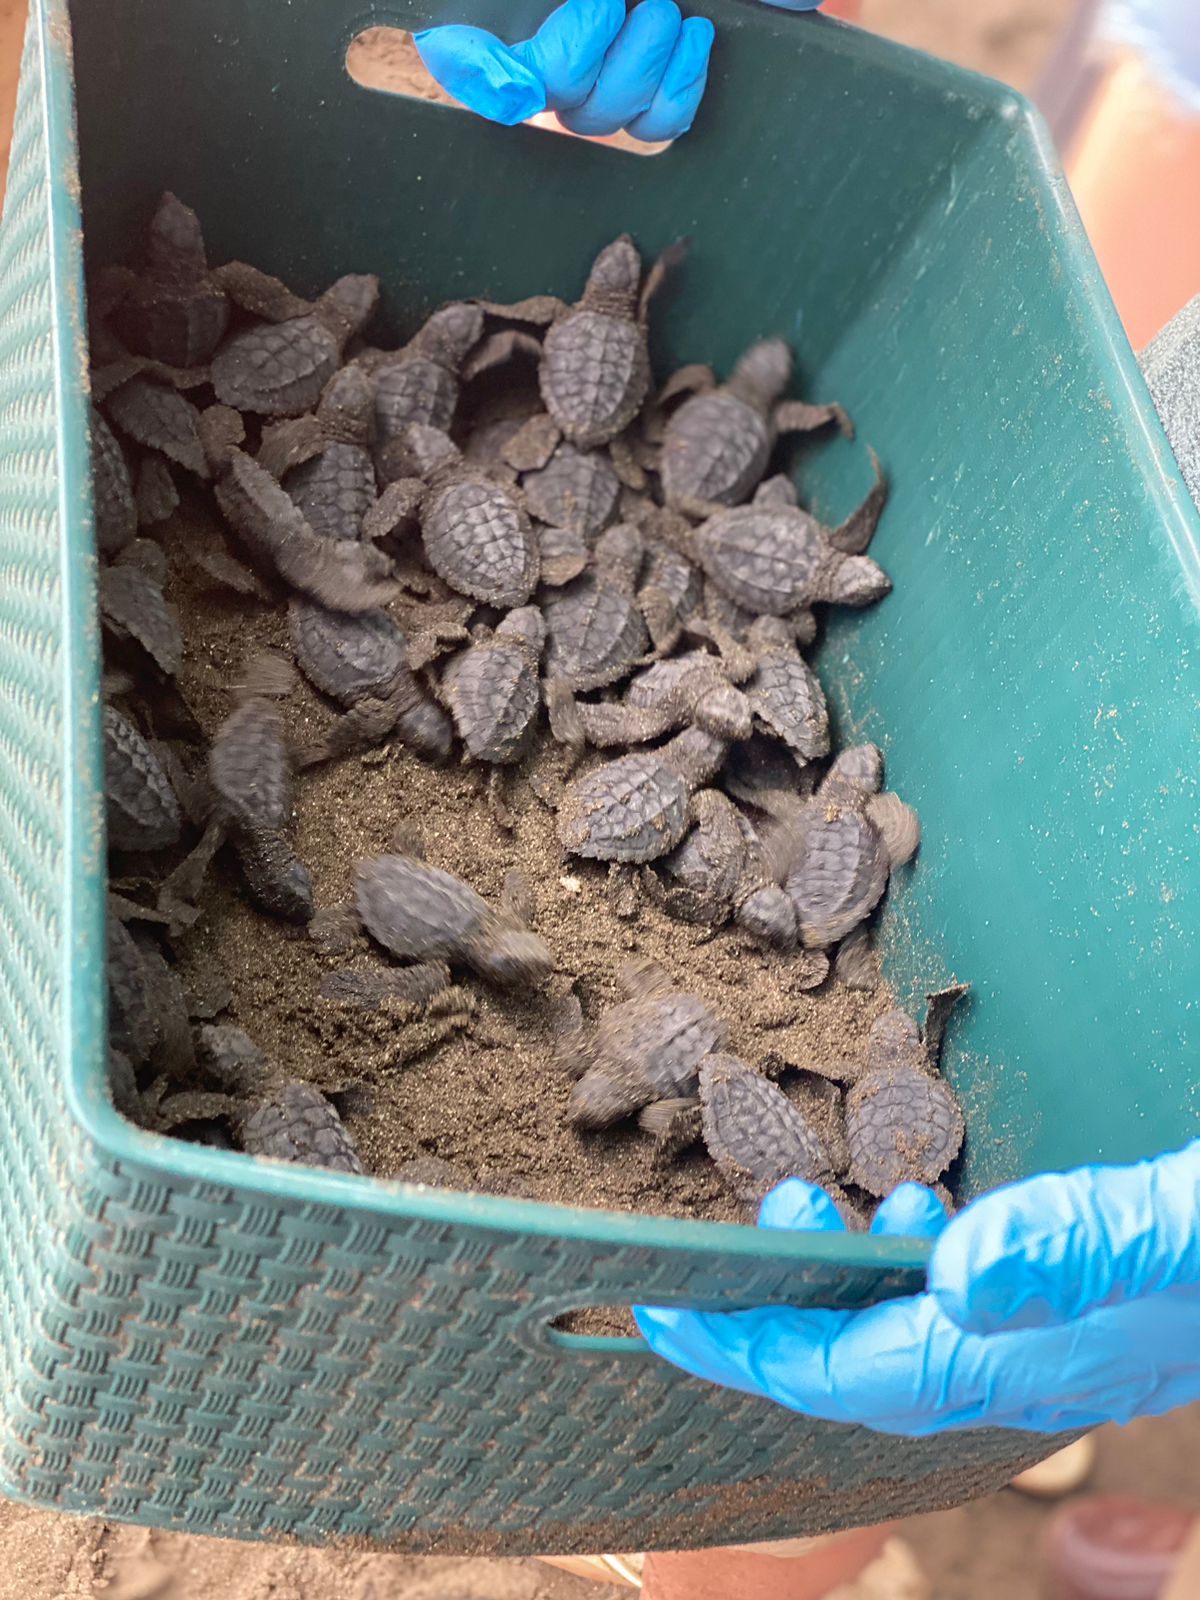 Baby Turtles on their way to Release